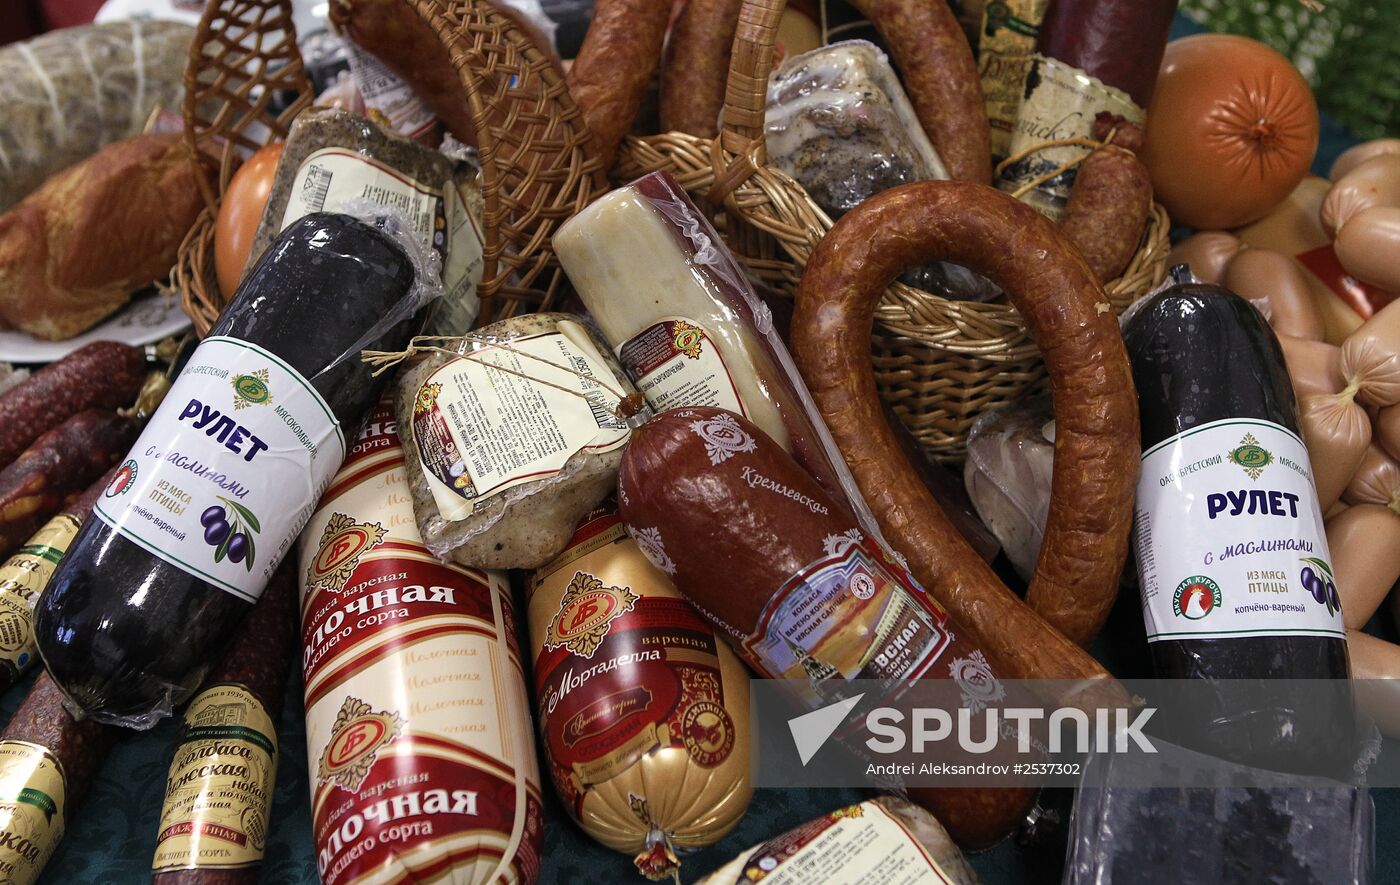 Belarusian products in Moscow